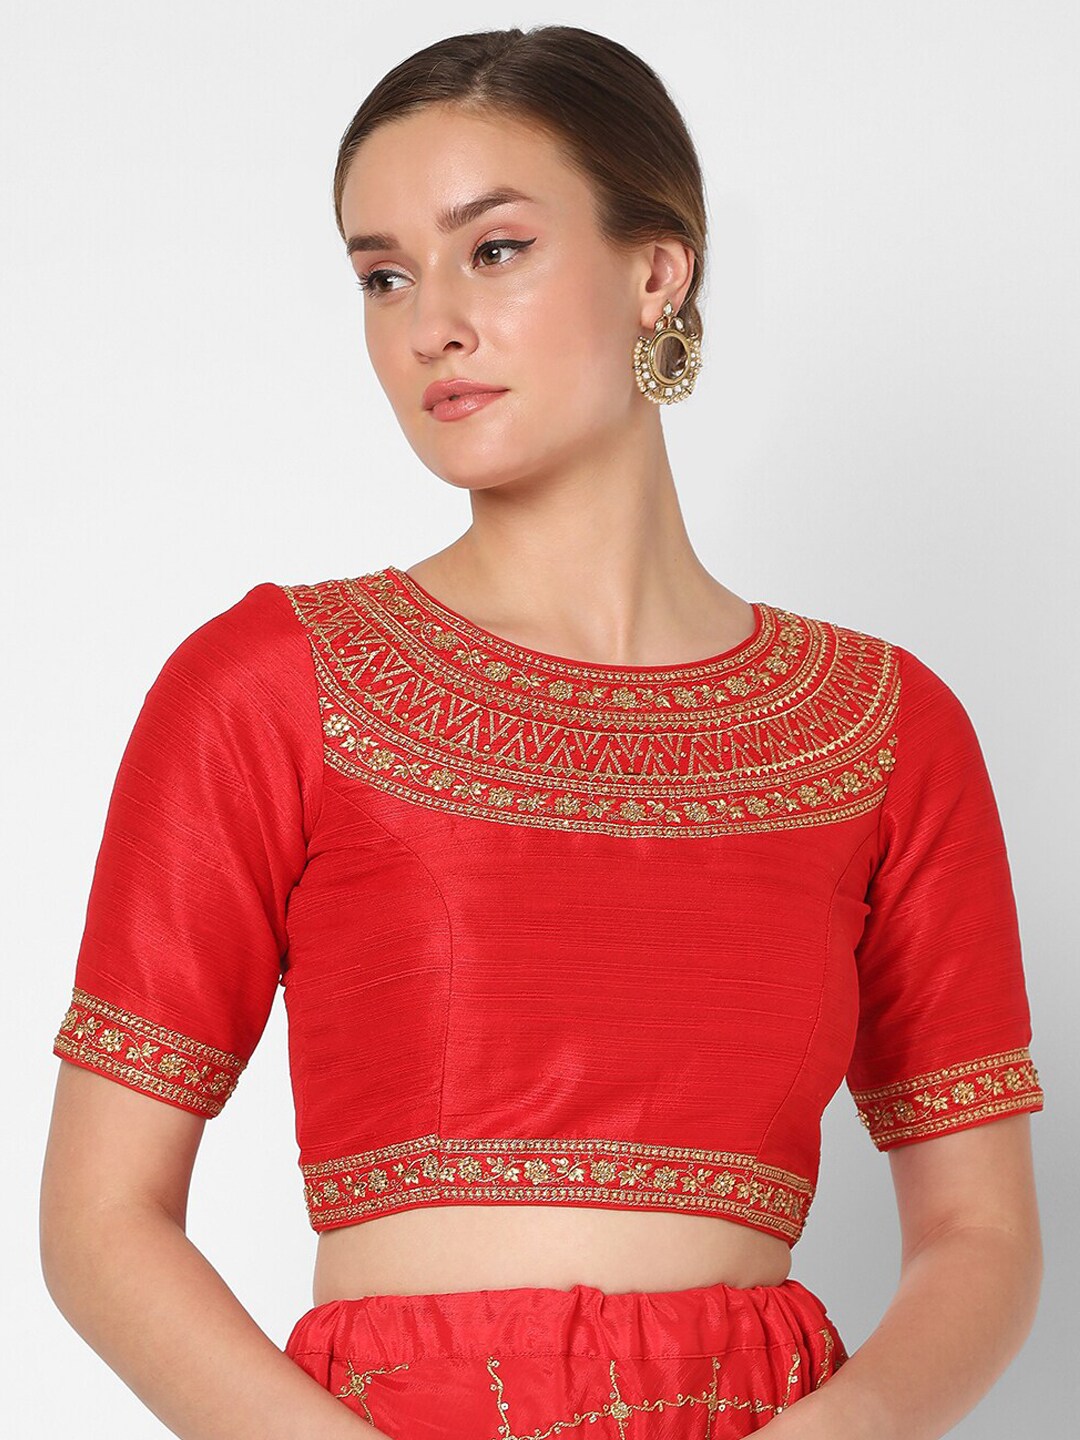 SALWAR STUDIO Women Red & Gold-Coloured Embroidered Readymade Saree Blouse Price in India